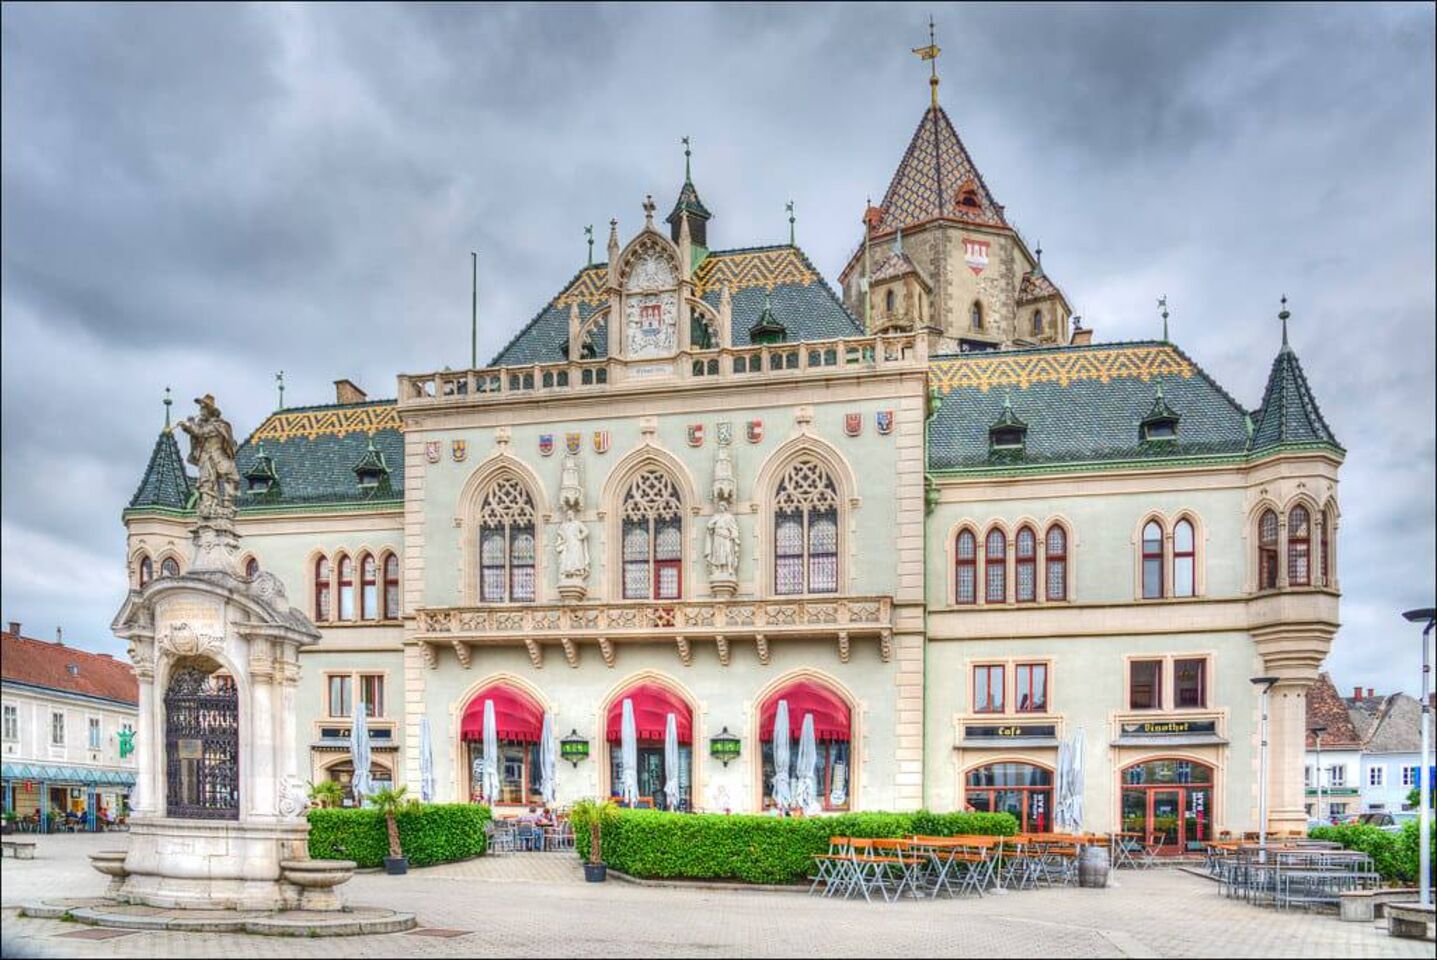 A photo of Rathaus